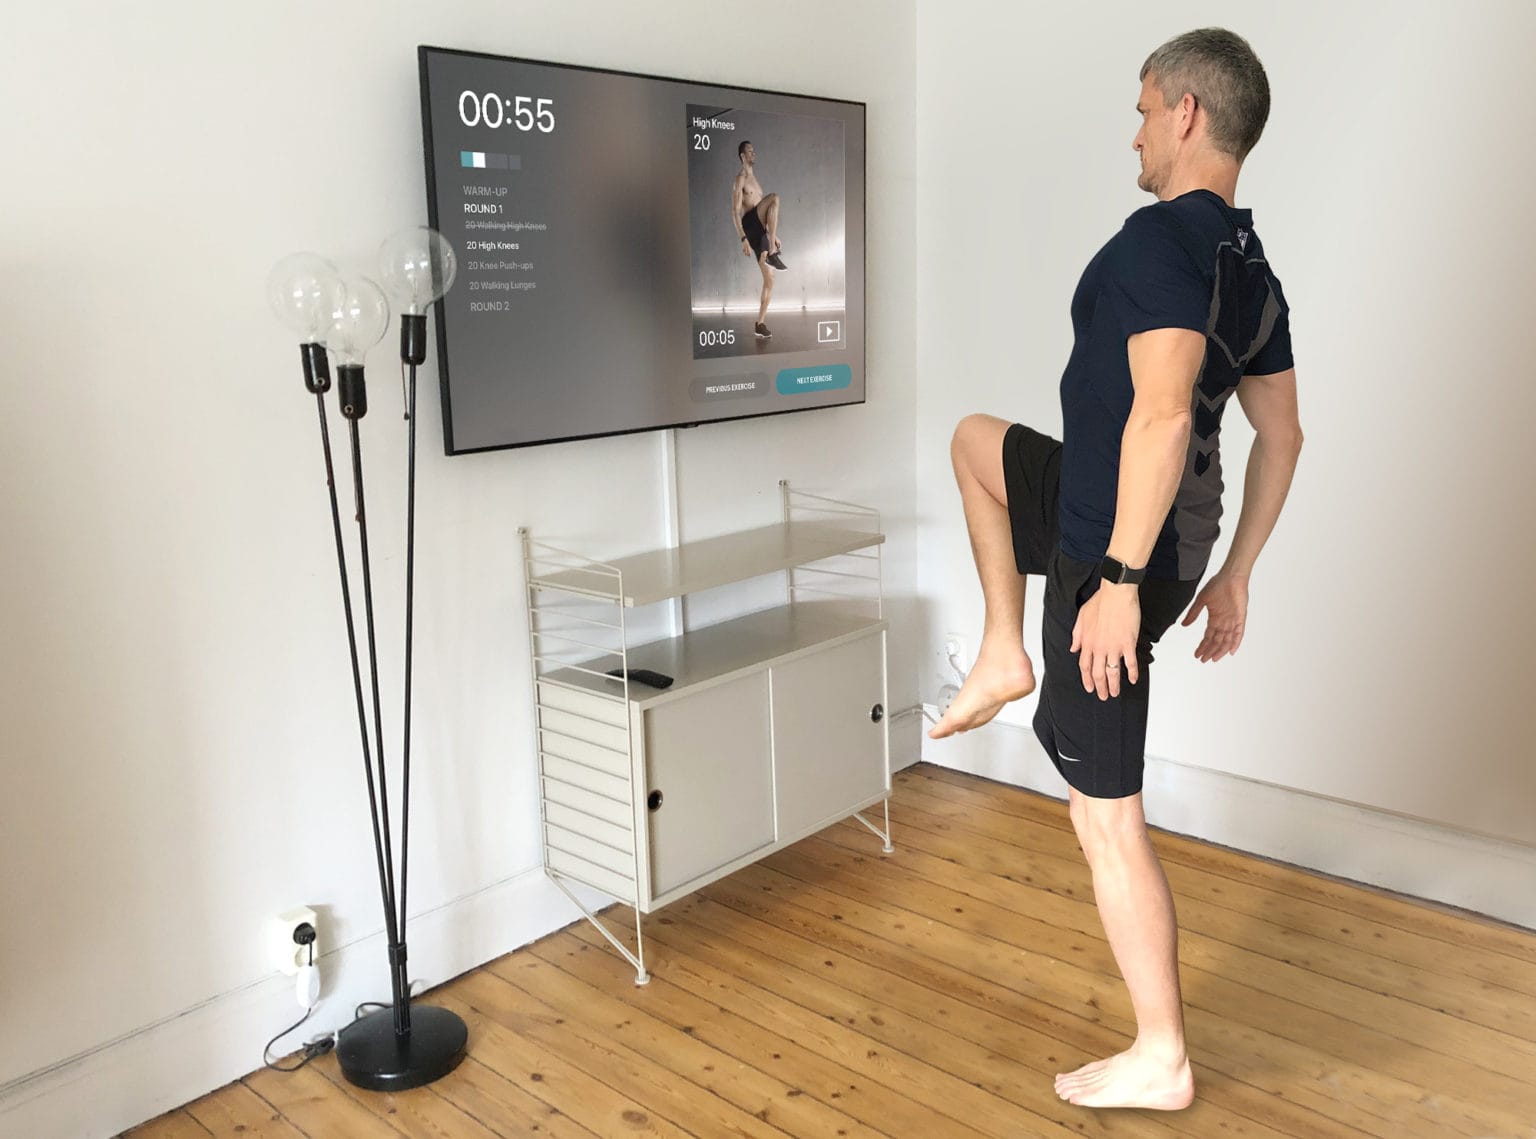 Can't get to the gym? Let your Apple TV bring the gym to you.